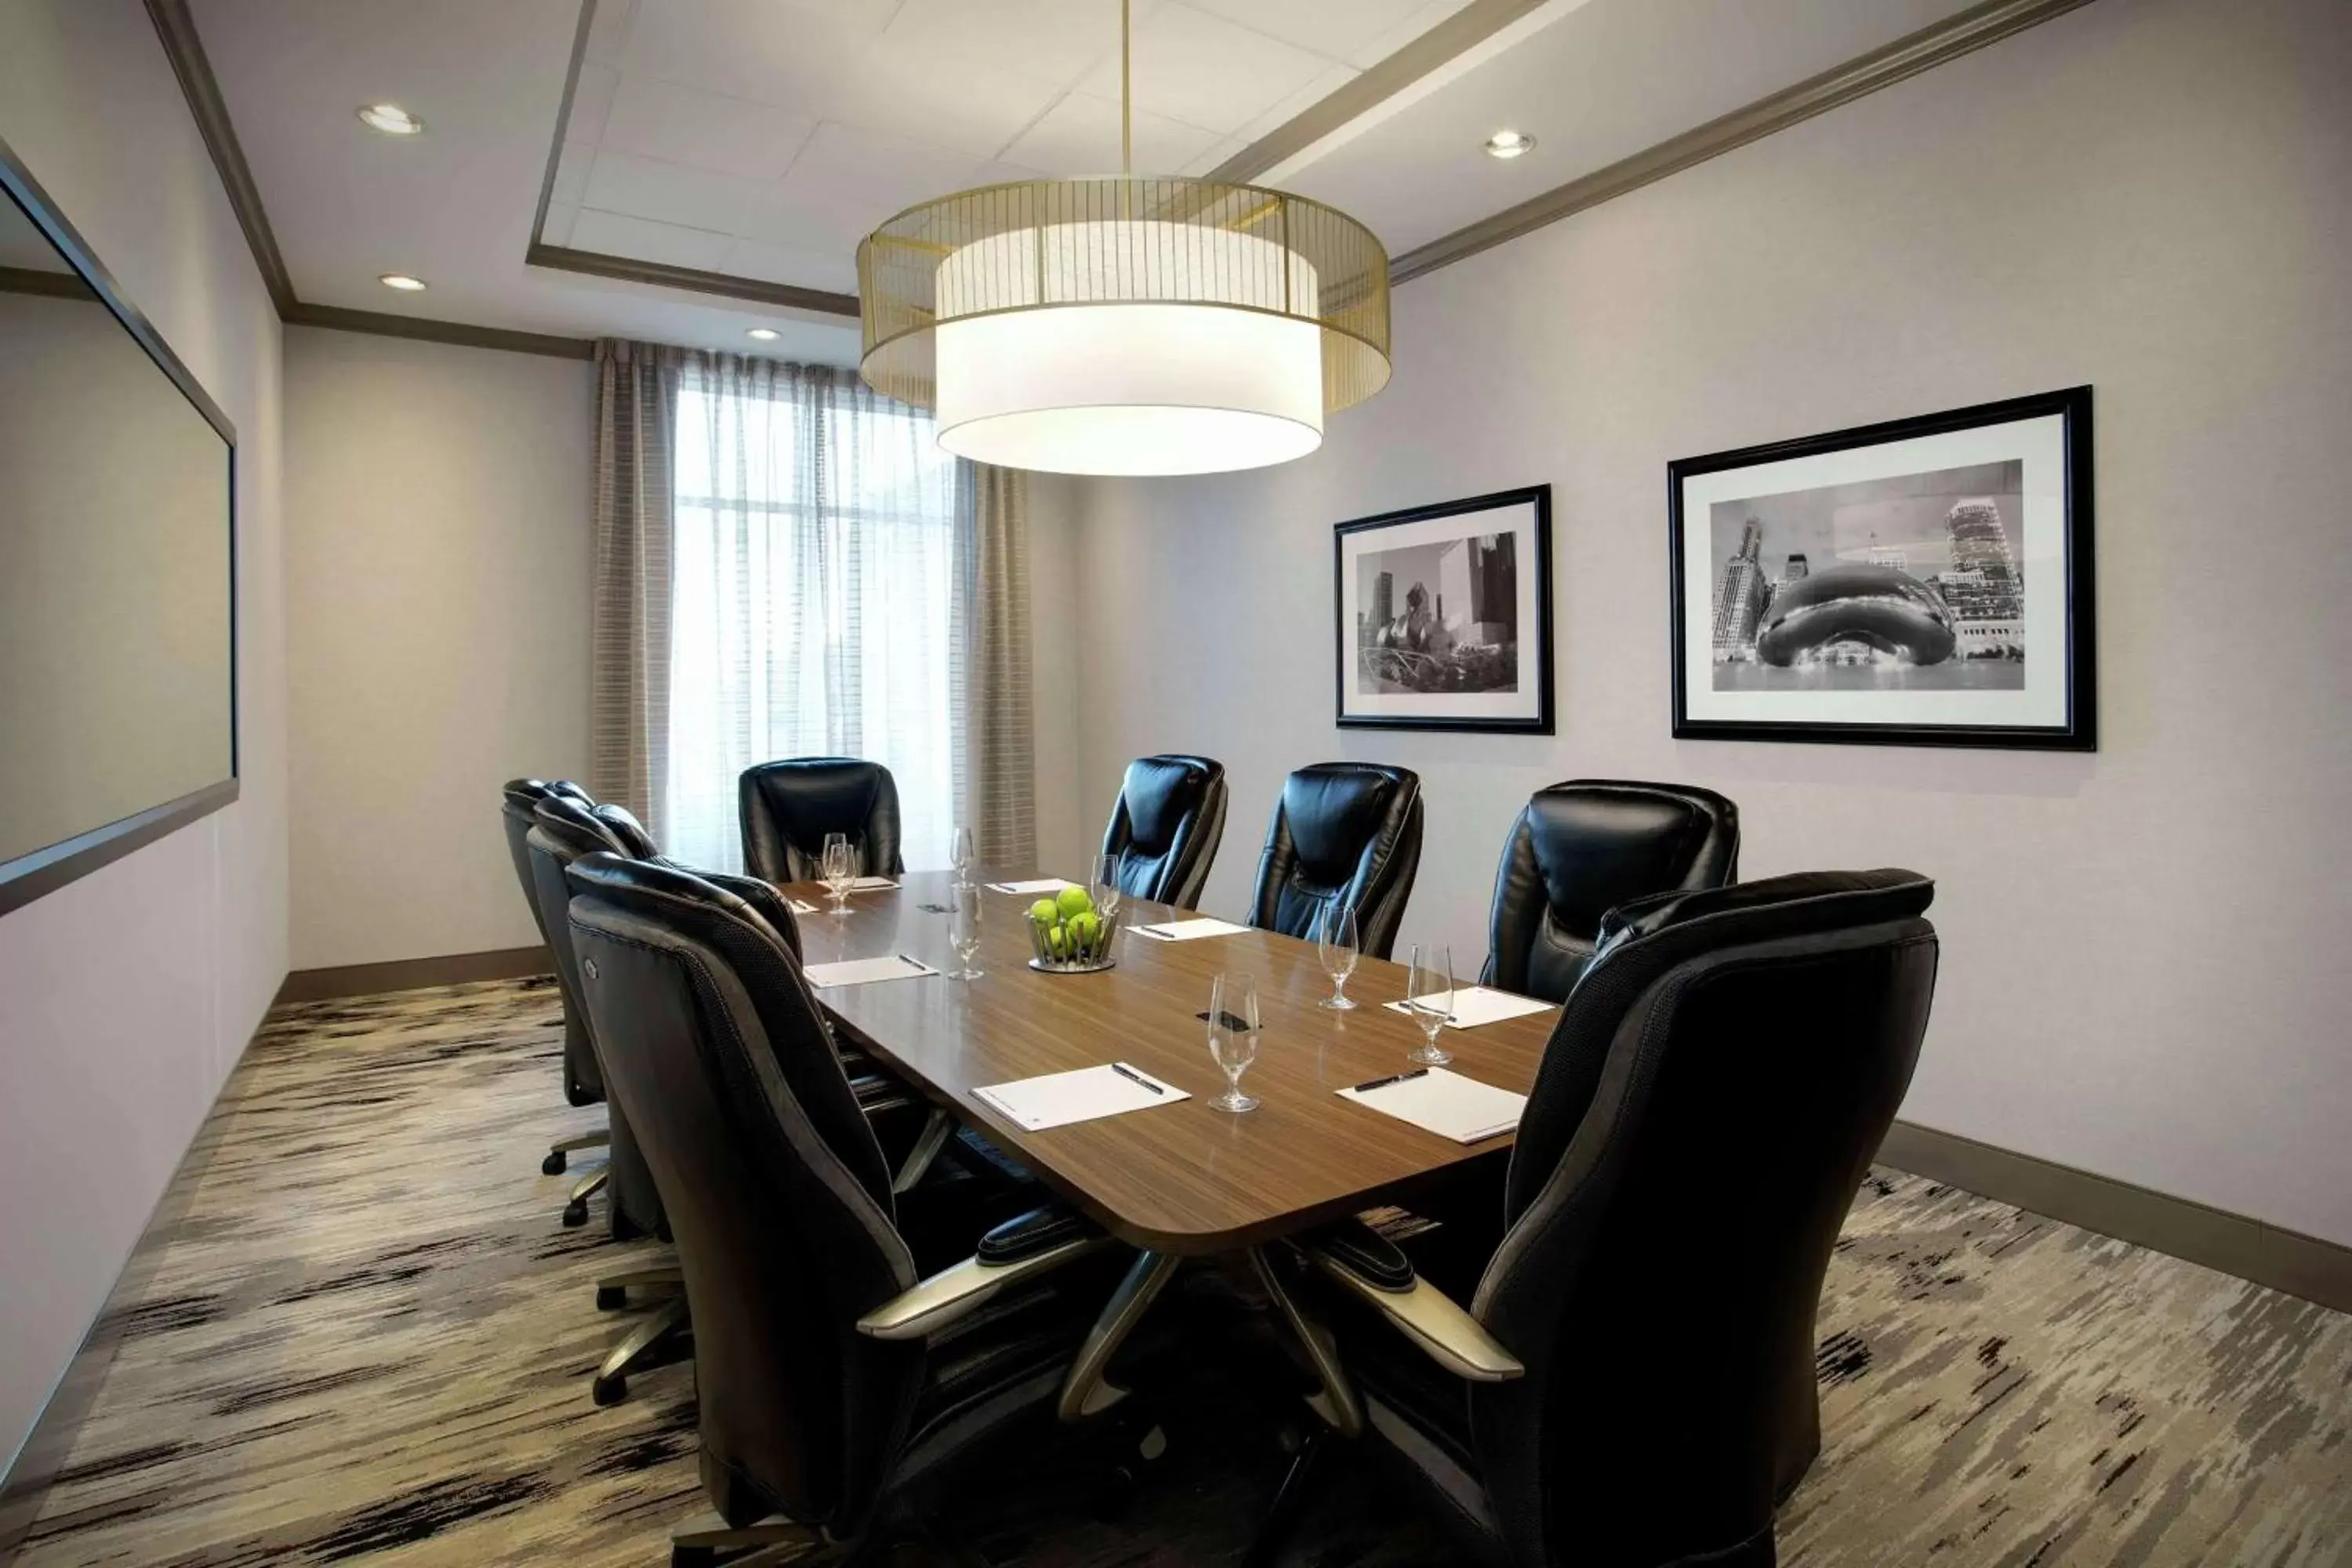 Meeting/conference room in DoubleTree by Hilton Chicago Midway Airport, IL